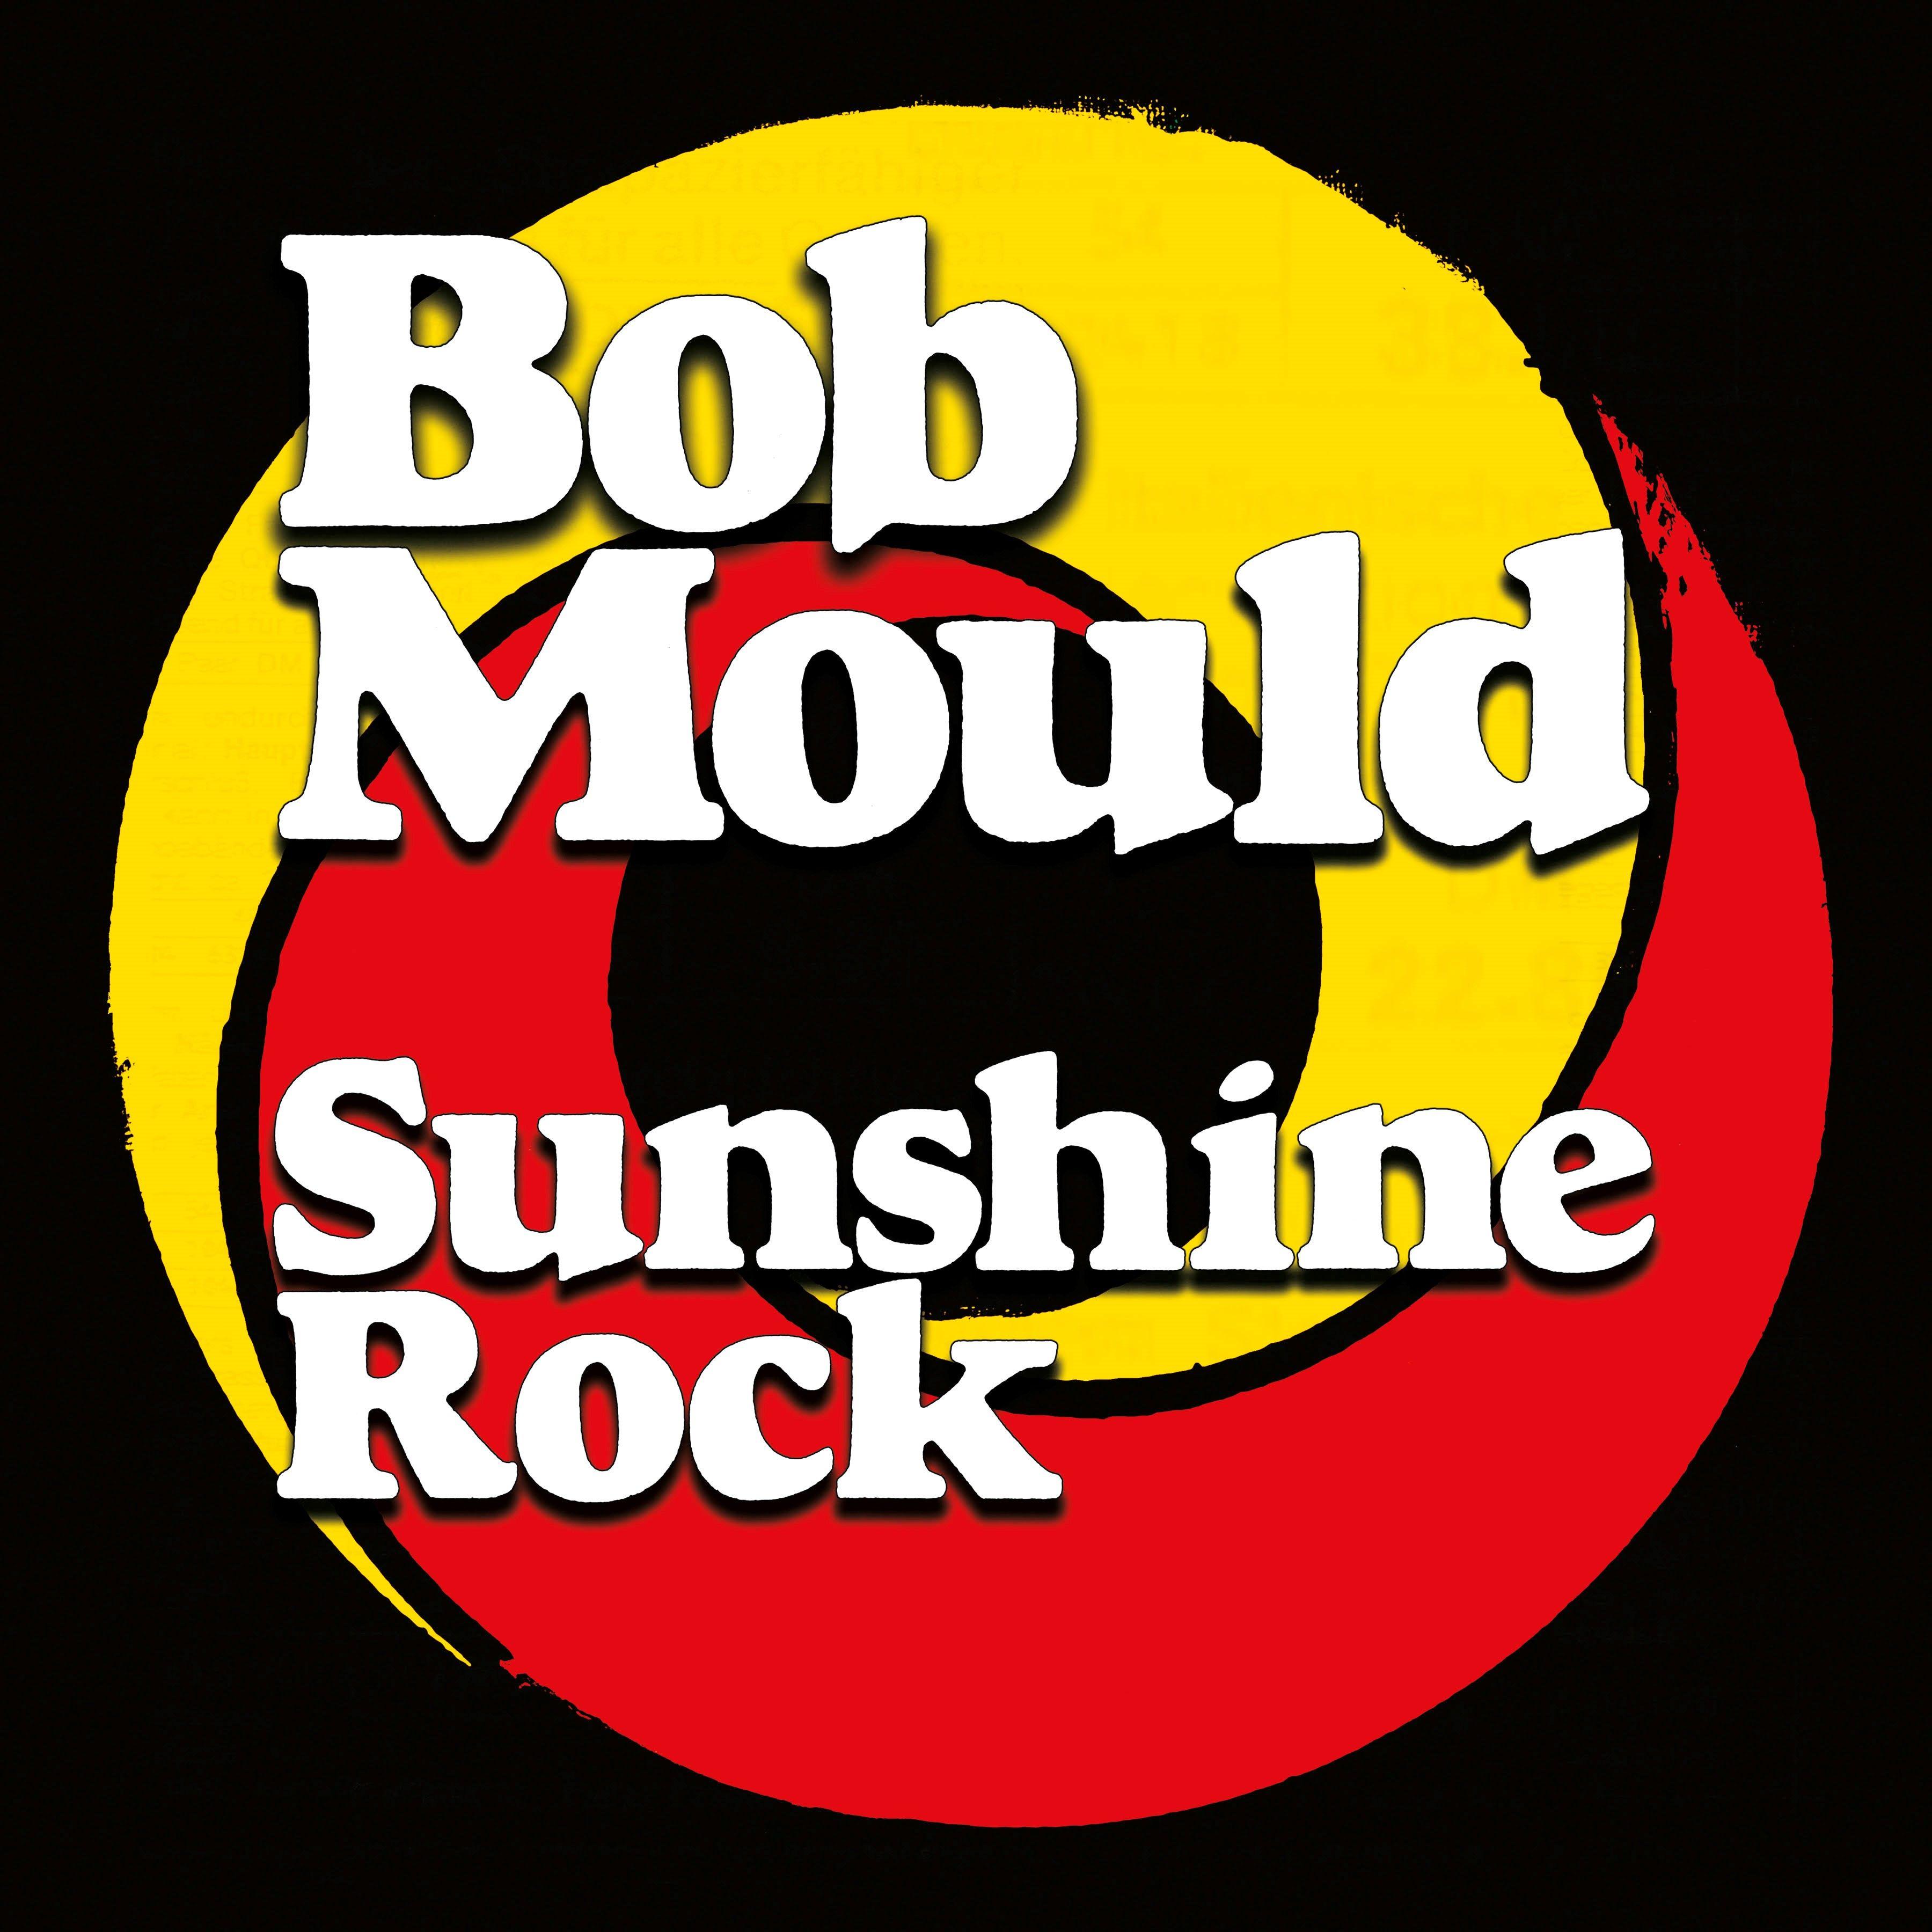 Red and Yellow Cafe Logo - Sunshine Rock (Red And Yellow Swirl Vinyl) by Bob Mould - The LP Café